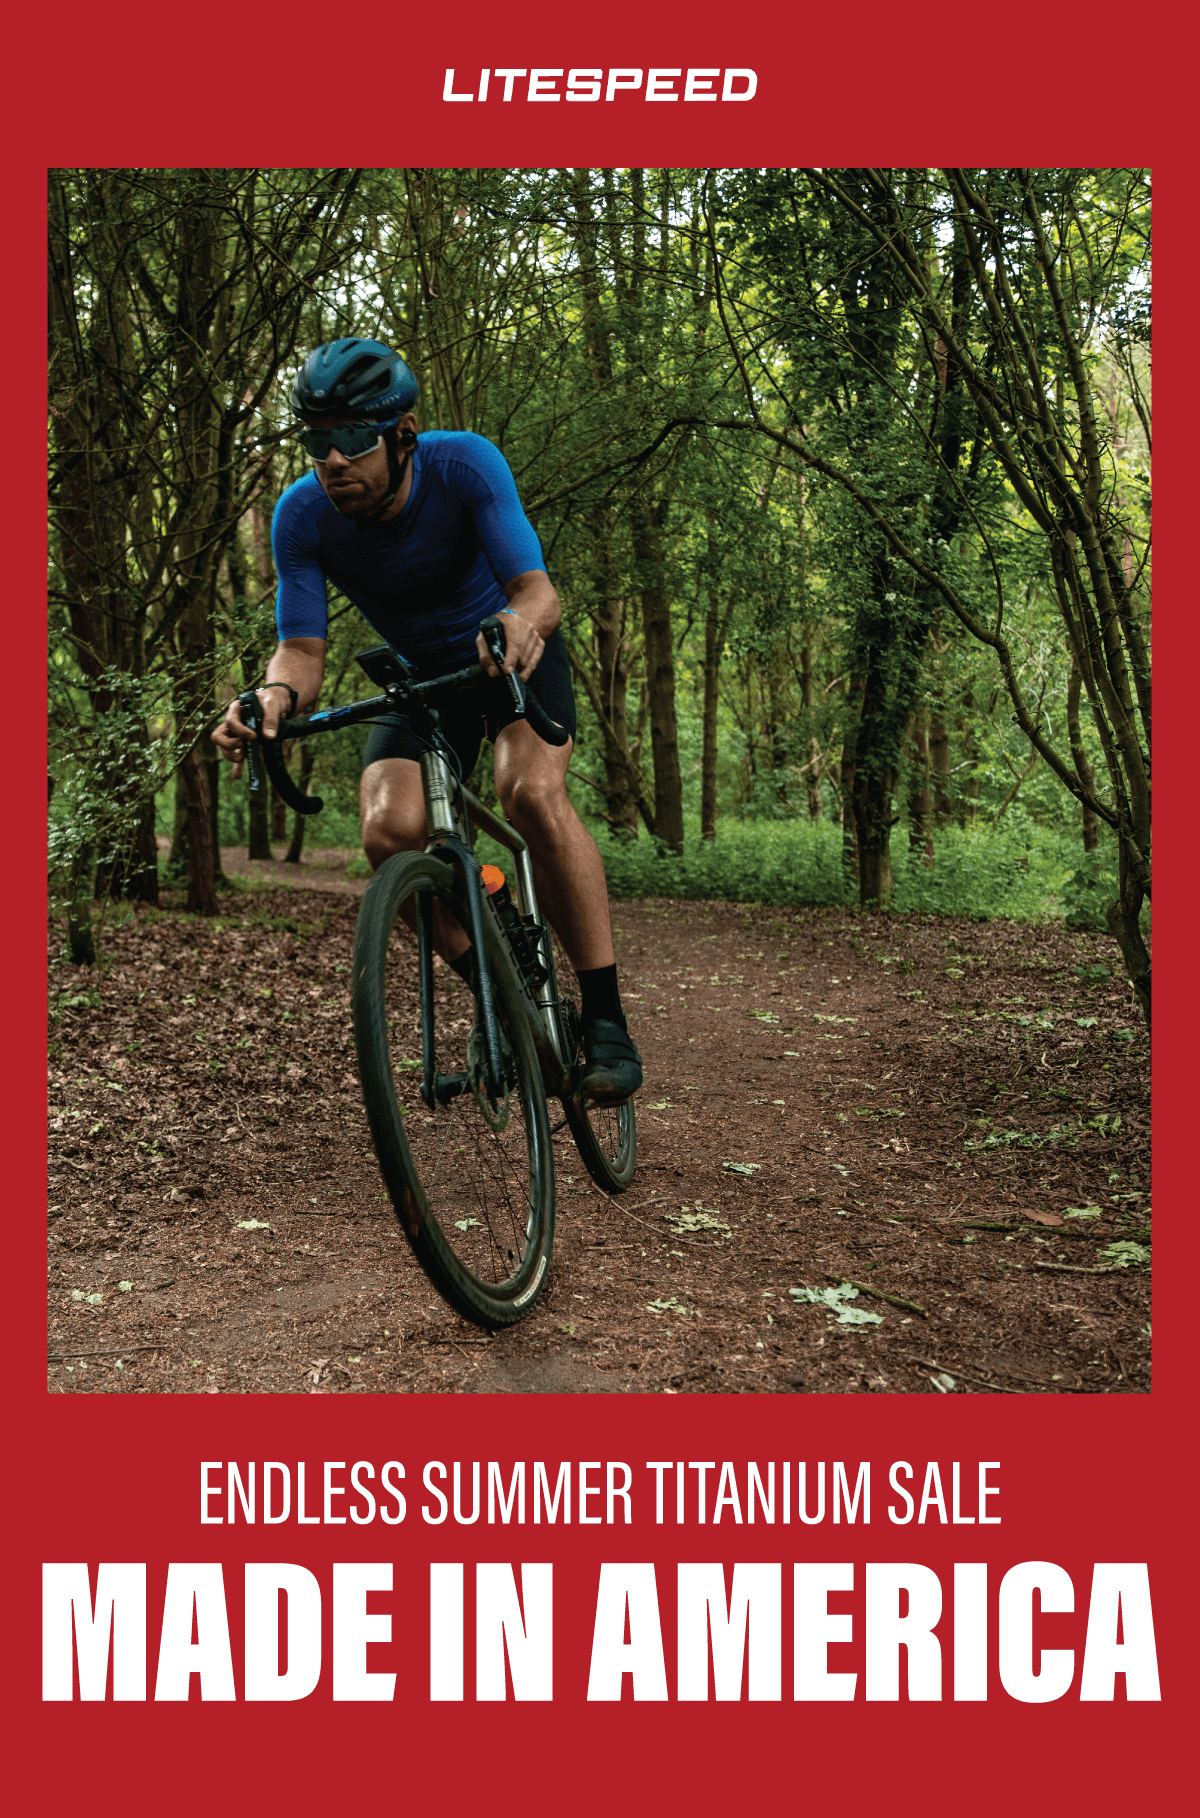 The Litespeed Endless Summer Sale starts now. Shop made-in-the-USA titanium bikes on sale now.